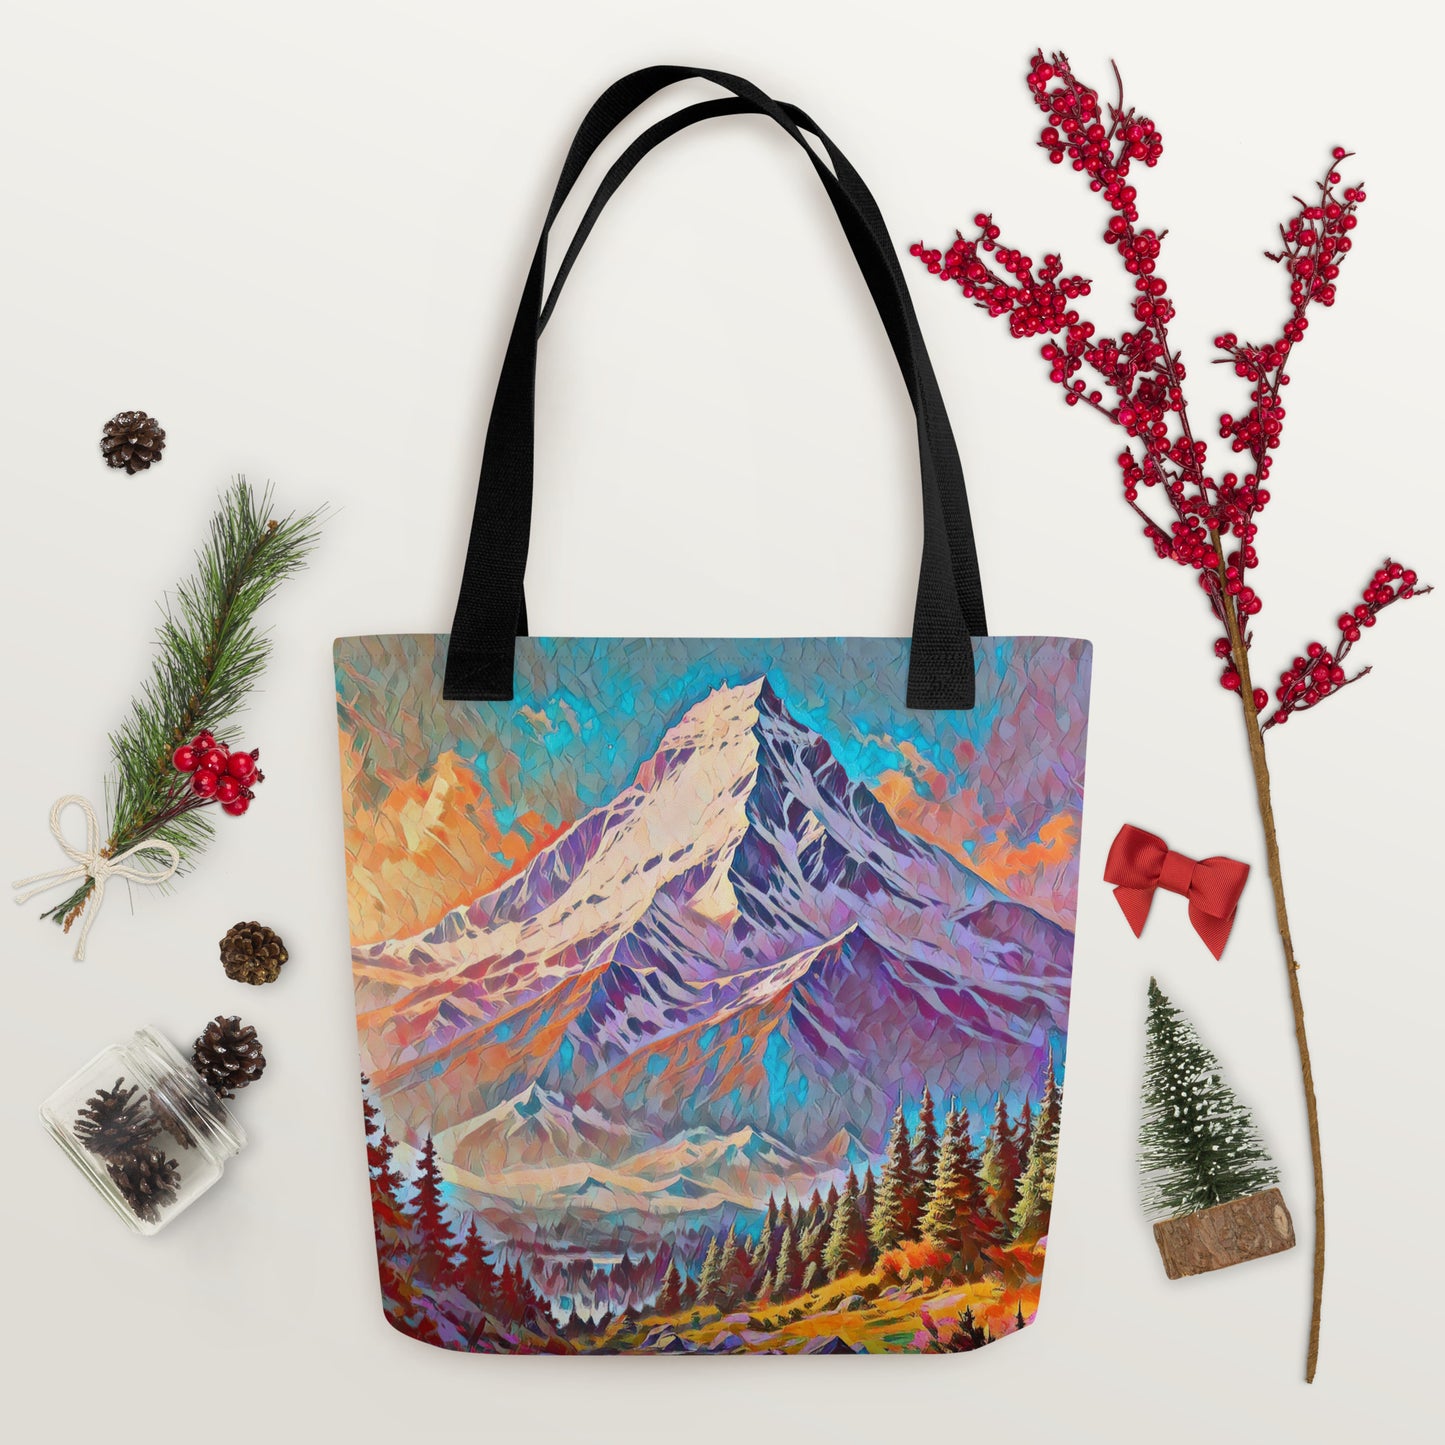 PACIFIC NW - Tote bag